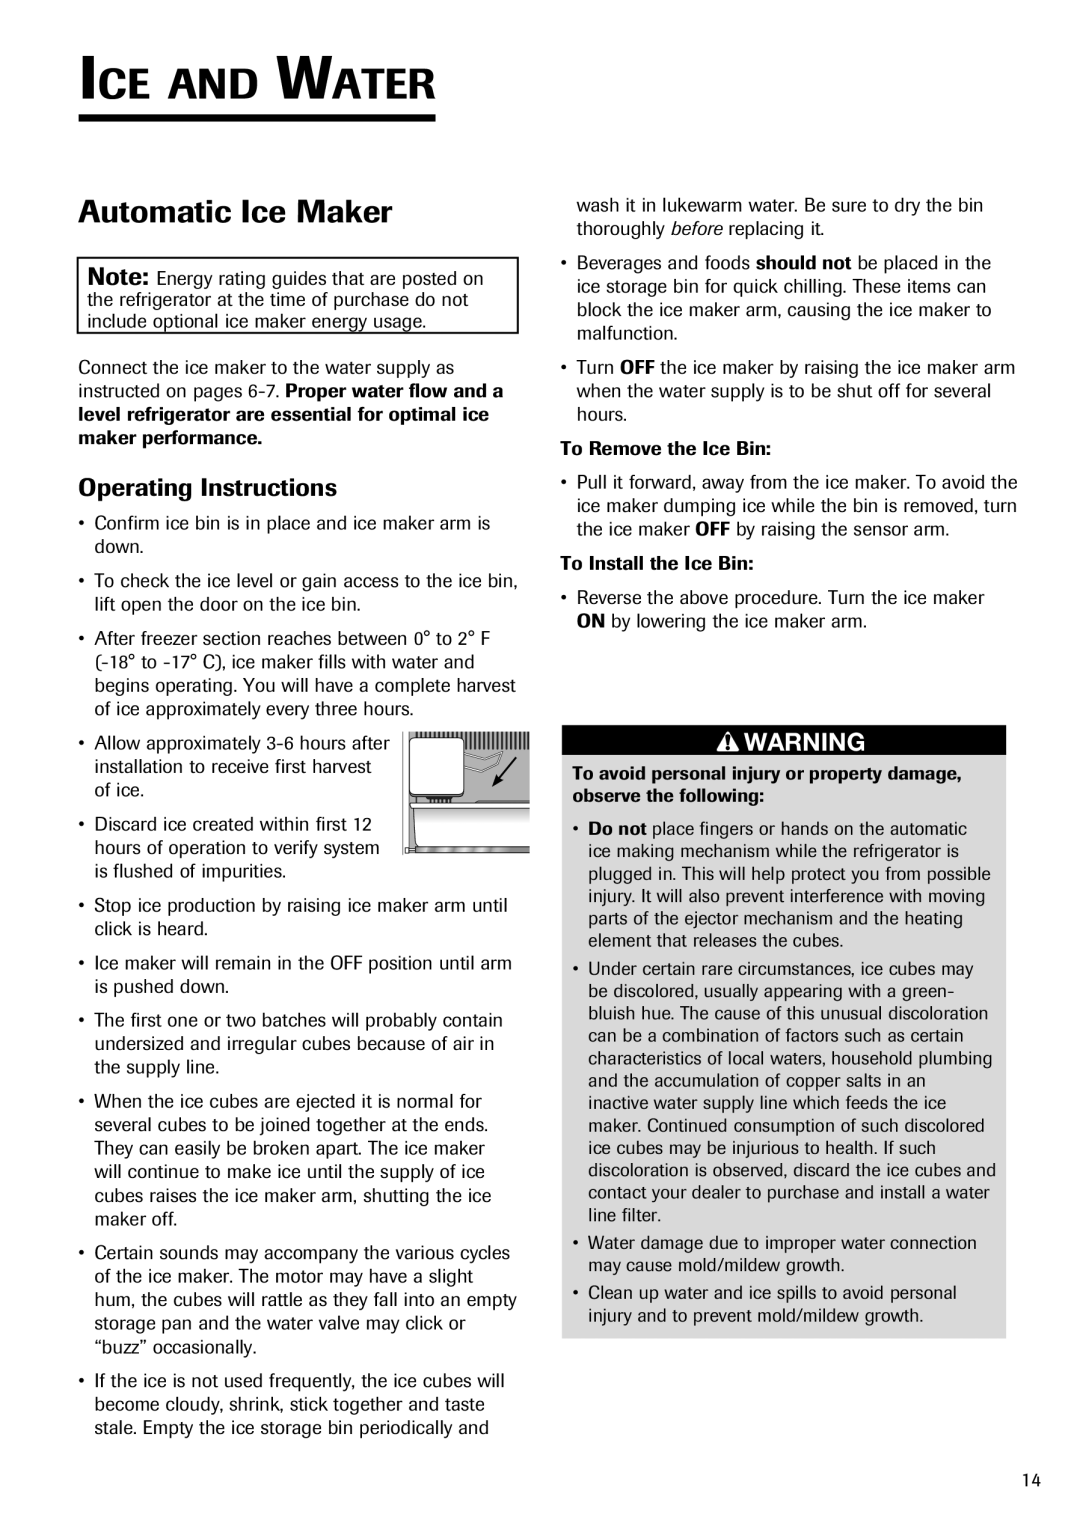 Fisher & Paykel RX256DT7X1 installation instructions Ice And Water, Automatic Ice Maker, Operating Instructions 